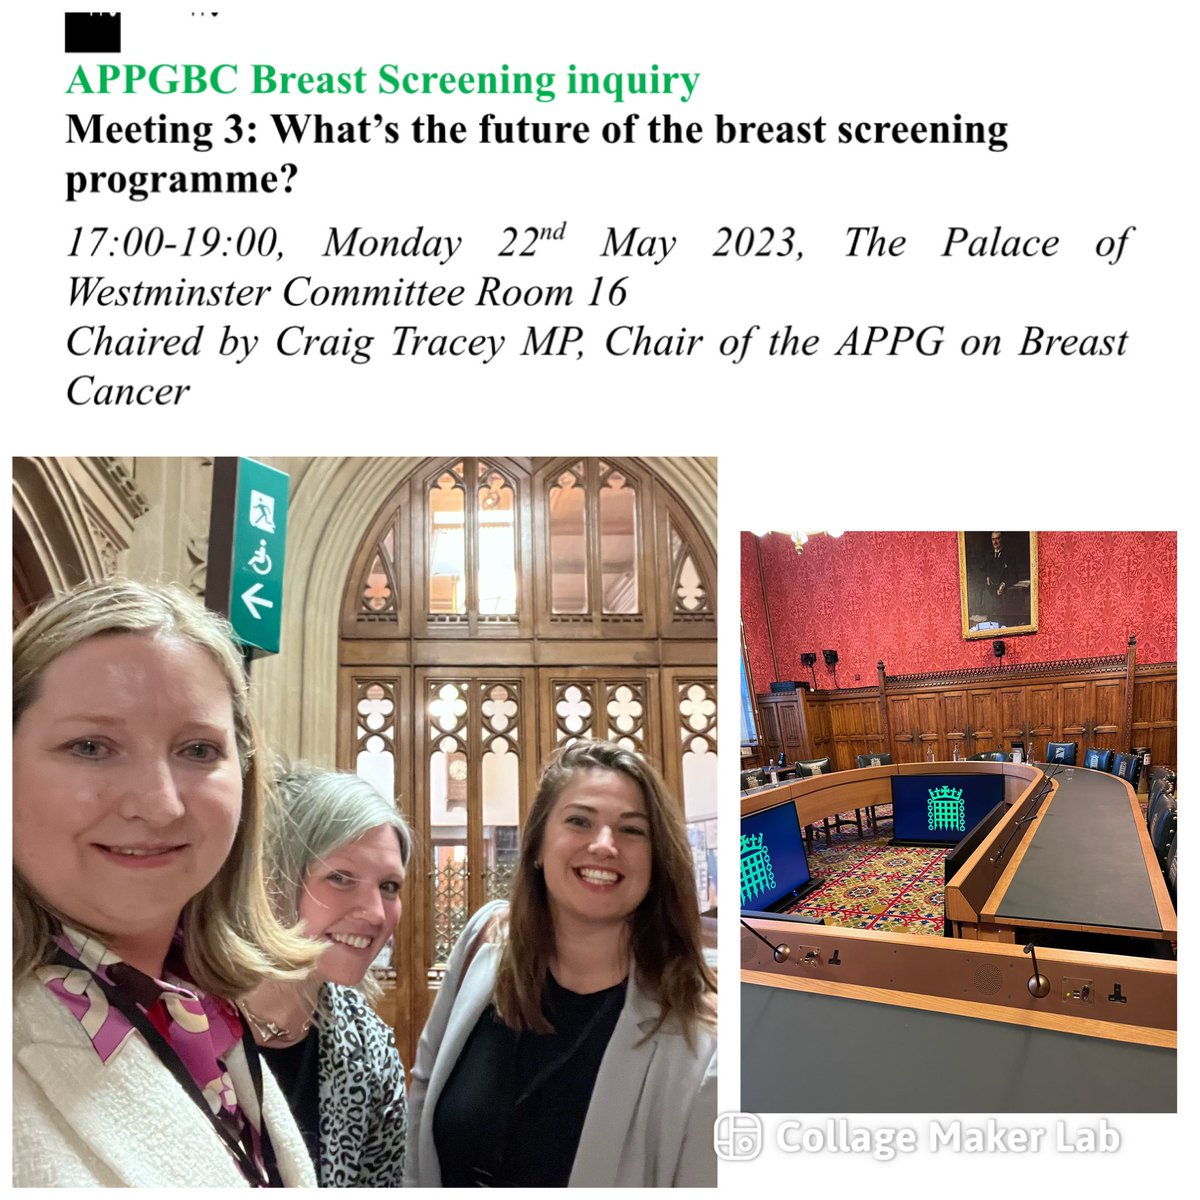 Our CanRisk team @Stephthepsych @fstutzin Nichola Fennell participated in @APPGBC meeting this week in Parliament. Our programme outcome will transform primary cancer care through personalised risk assessment by GPs (including screening options) according to that profile.